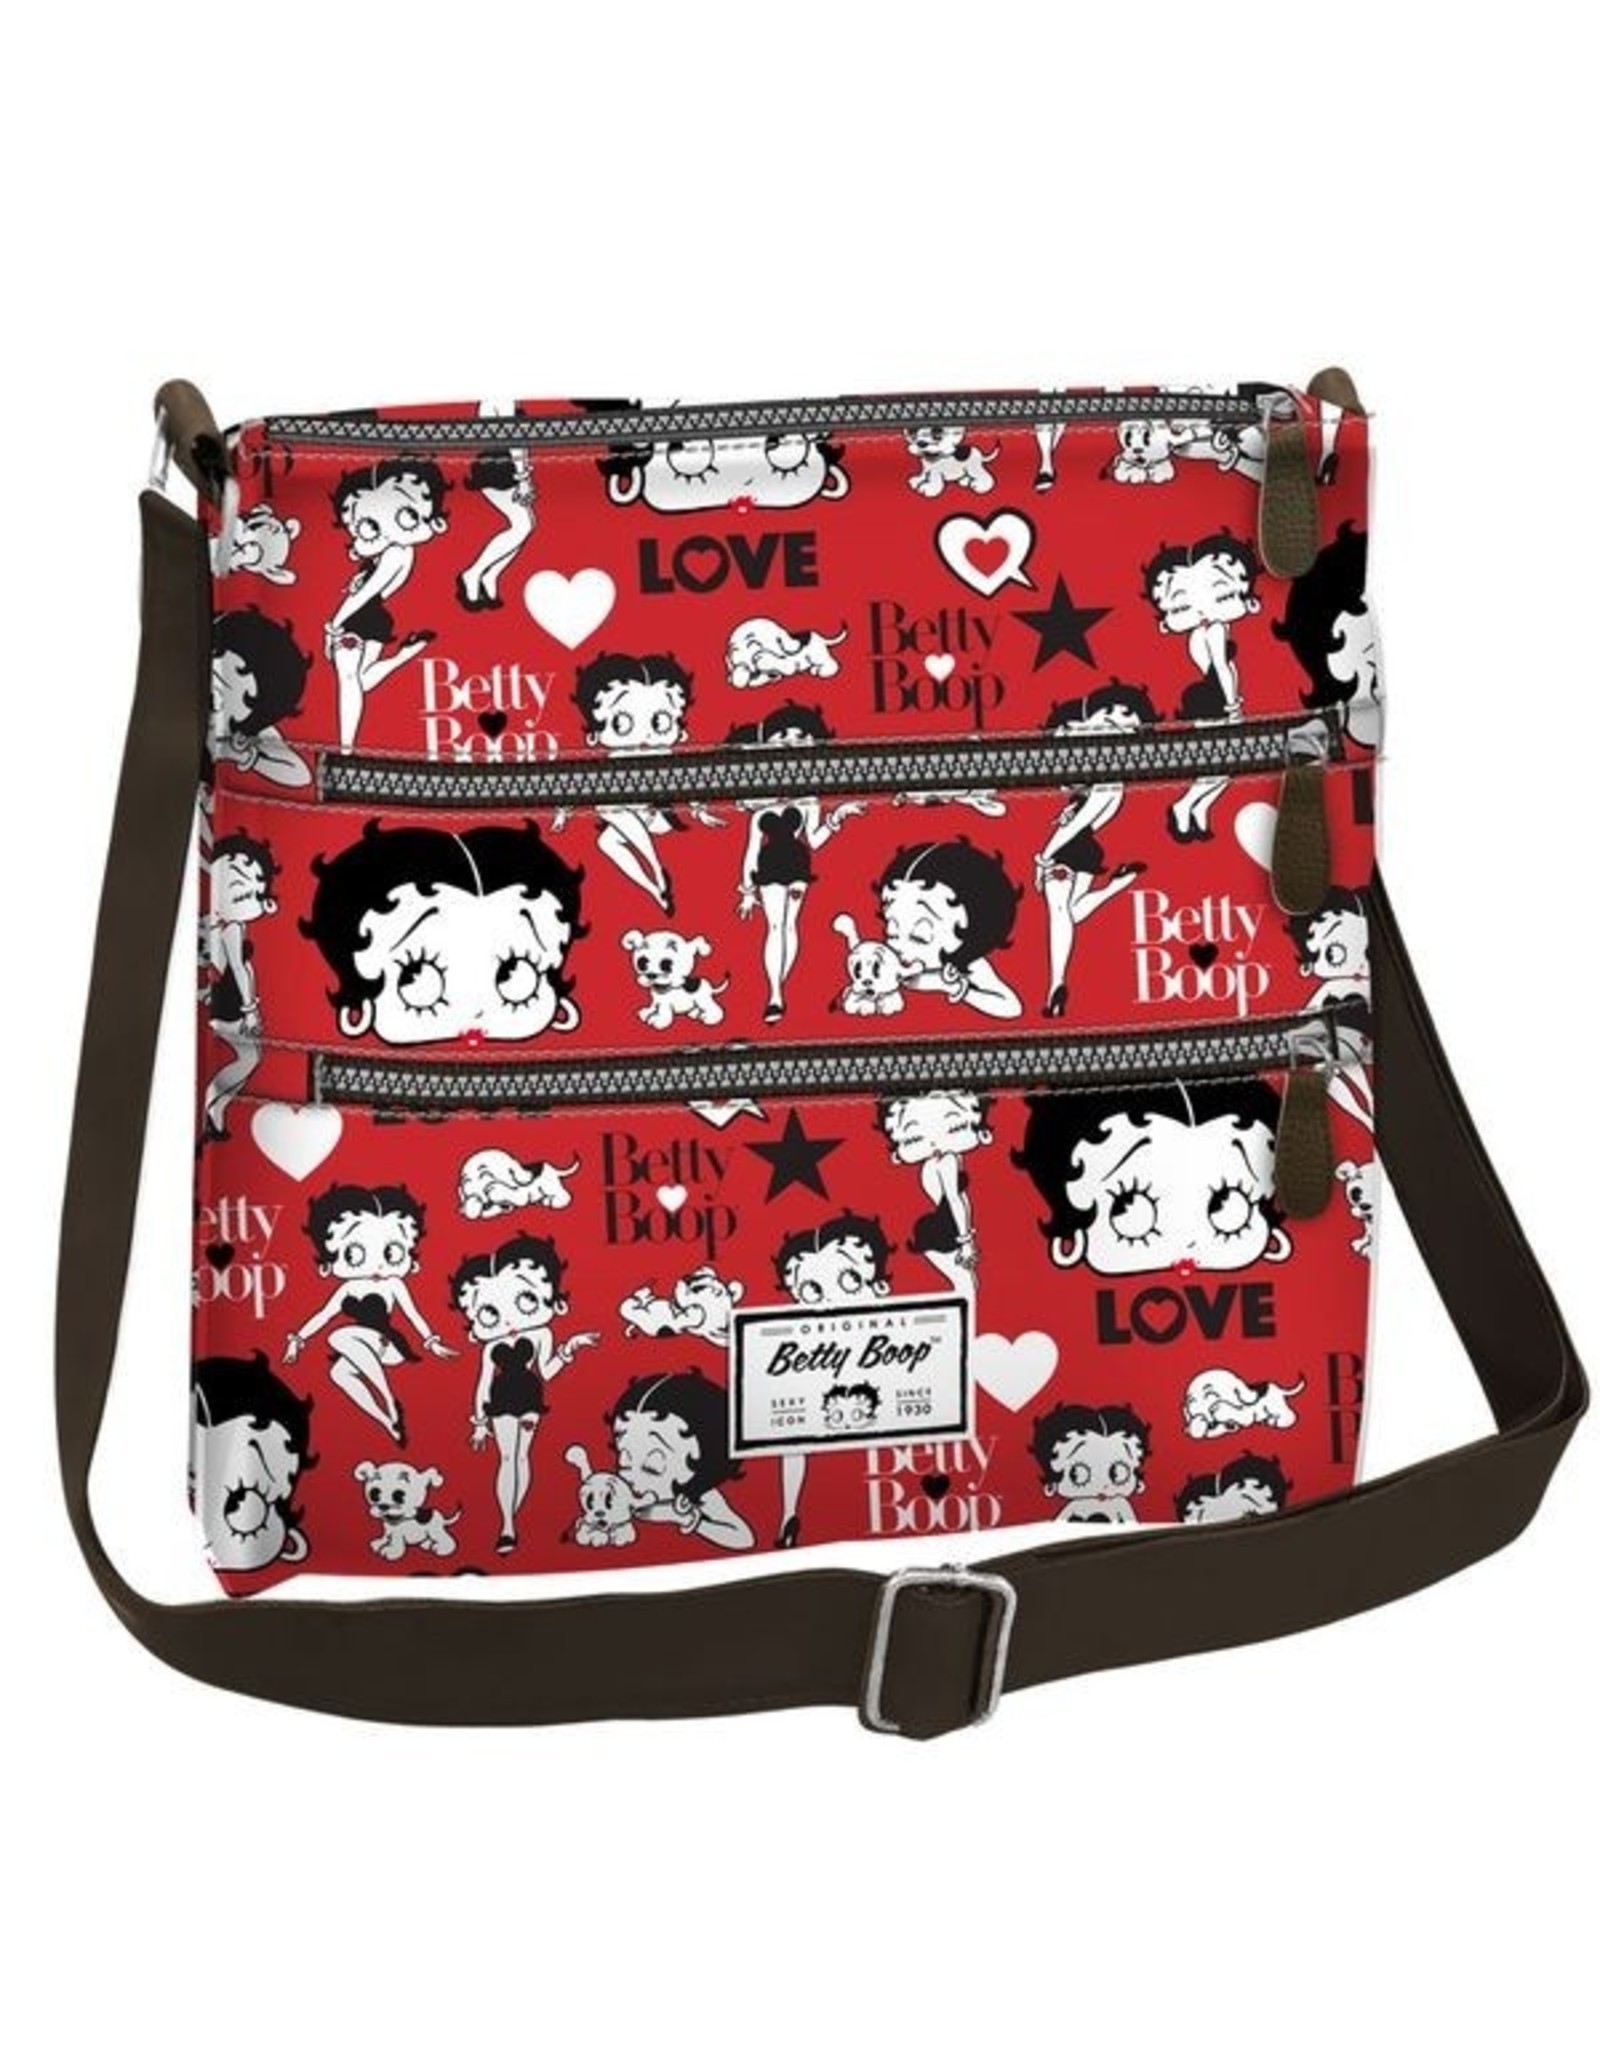 Betty Boop Betty Boop bags - Betty Boop Shoulder bag Love red